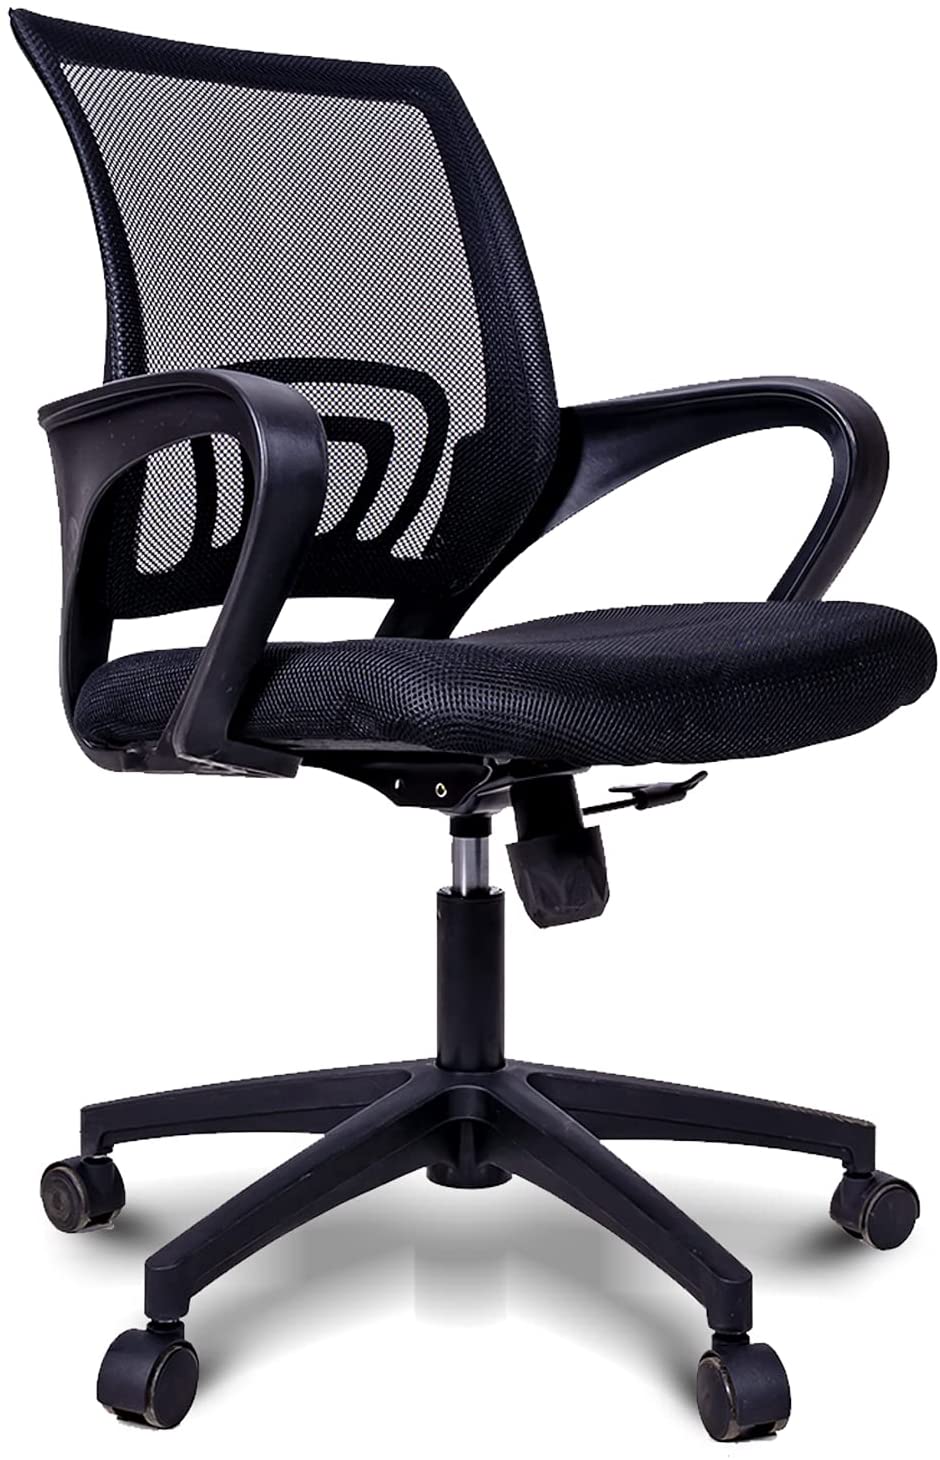 Pablo Ergonomic Lightweight Task Office desk Chair with Lumbar Support and Adjustable Swivel Rolling (Black / Gray)